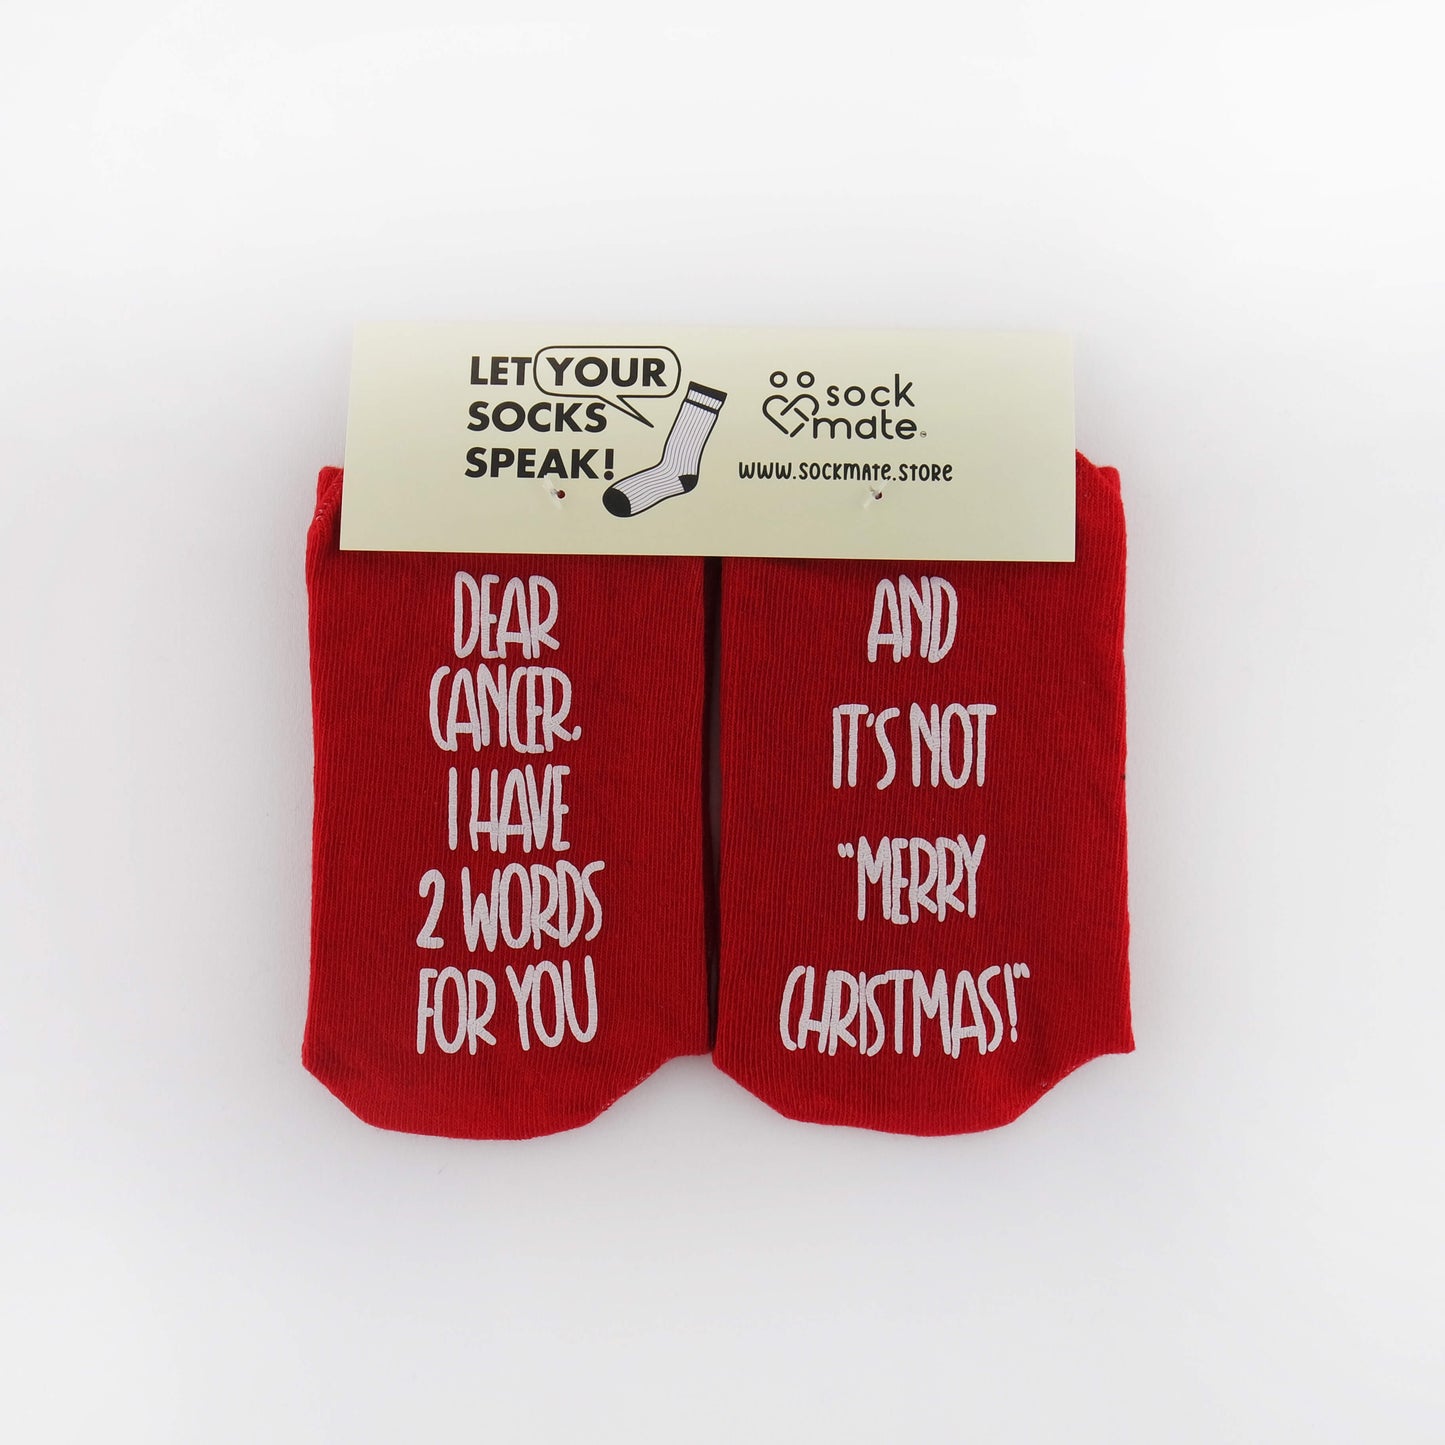 Women's Dear Cancer, I have 2 Words For You, And It's Not "Merry Christmas!" Cancer Socks